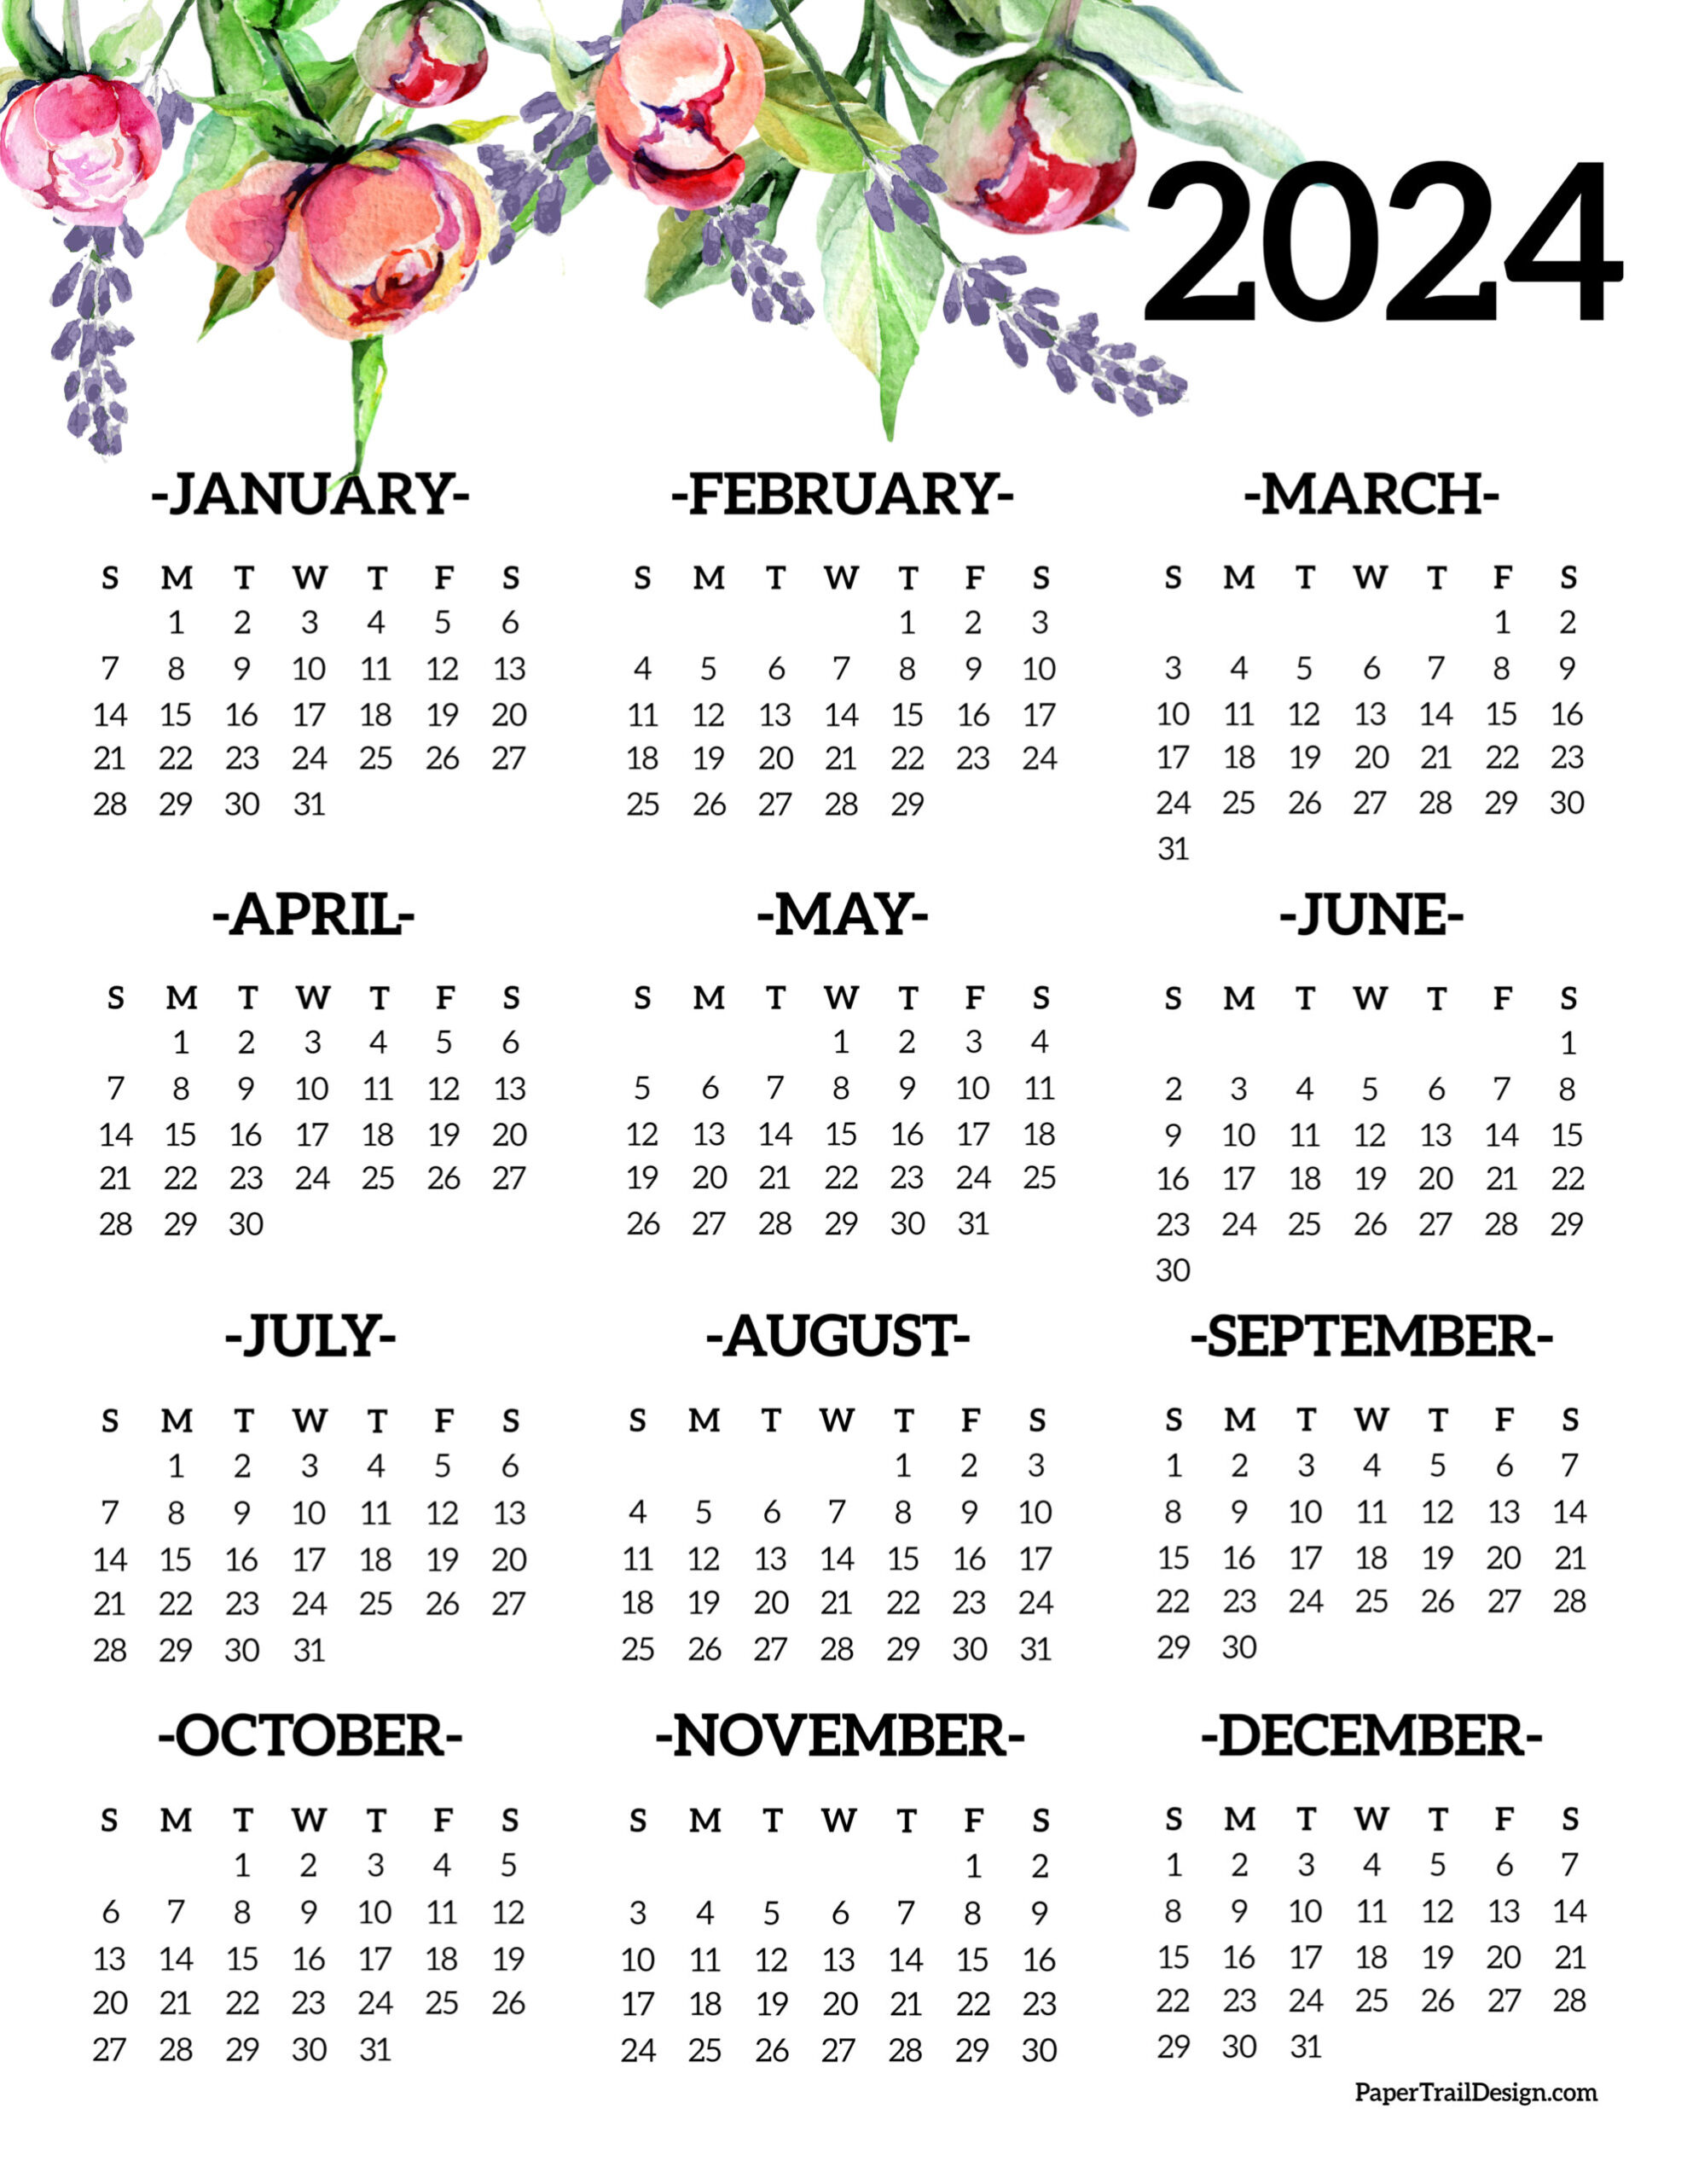 Calendar 2024 Printable One Page - Paper Trail Design for Free Printable One Page 2024 Calendar